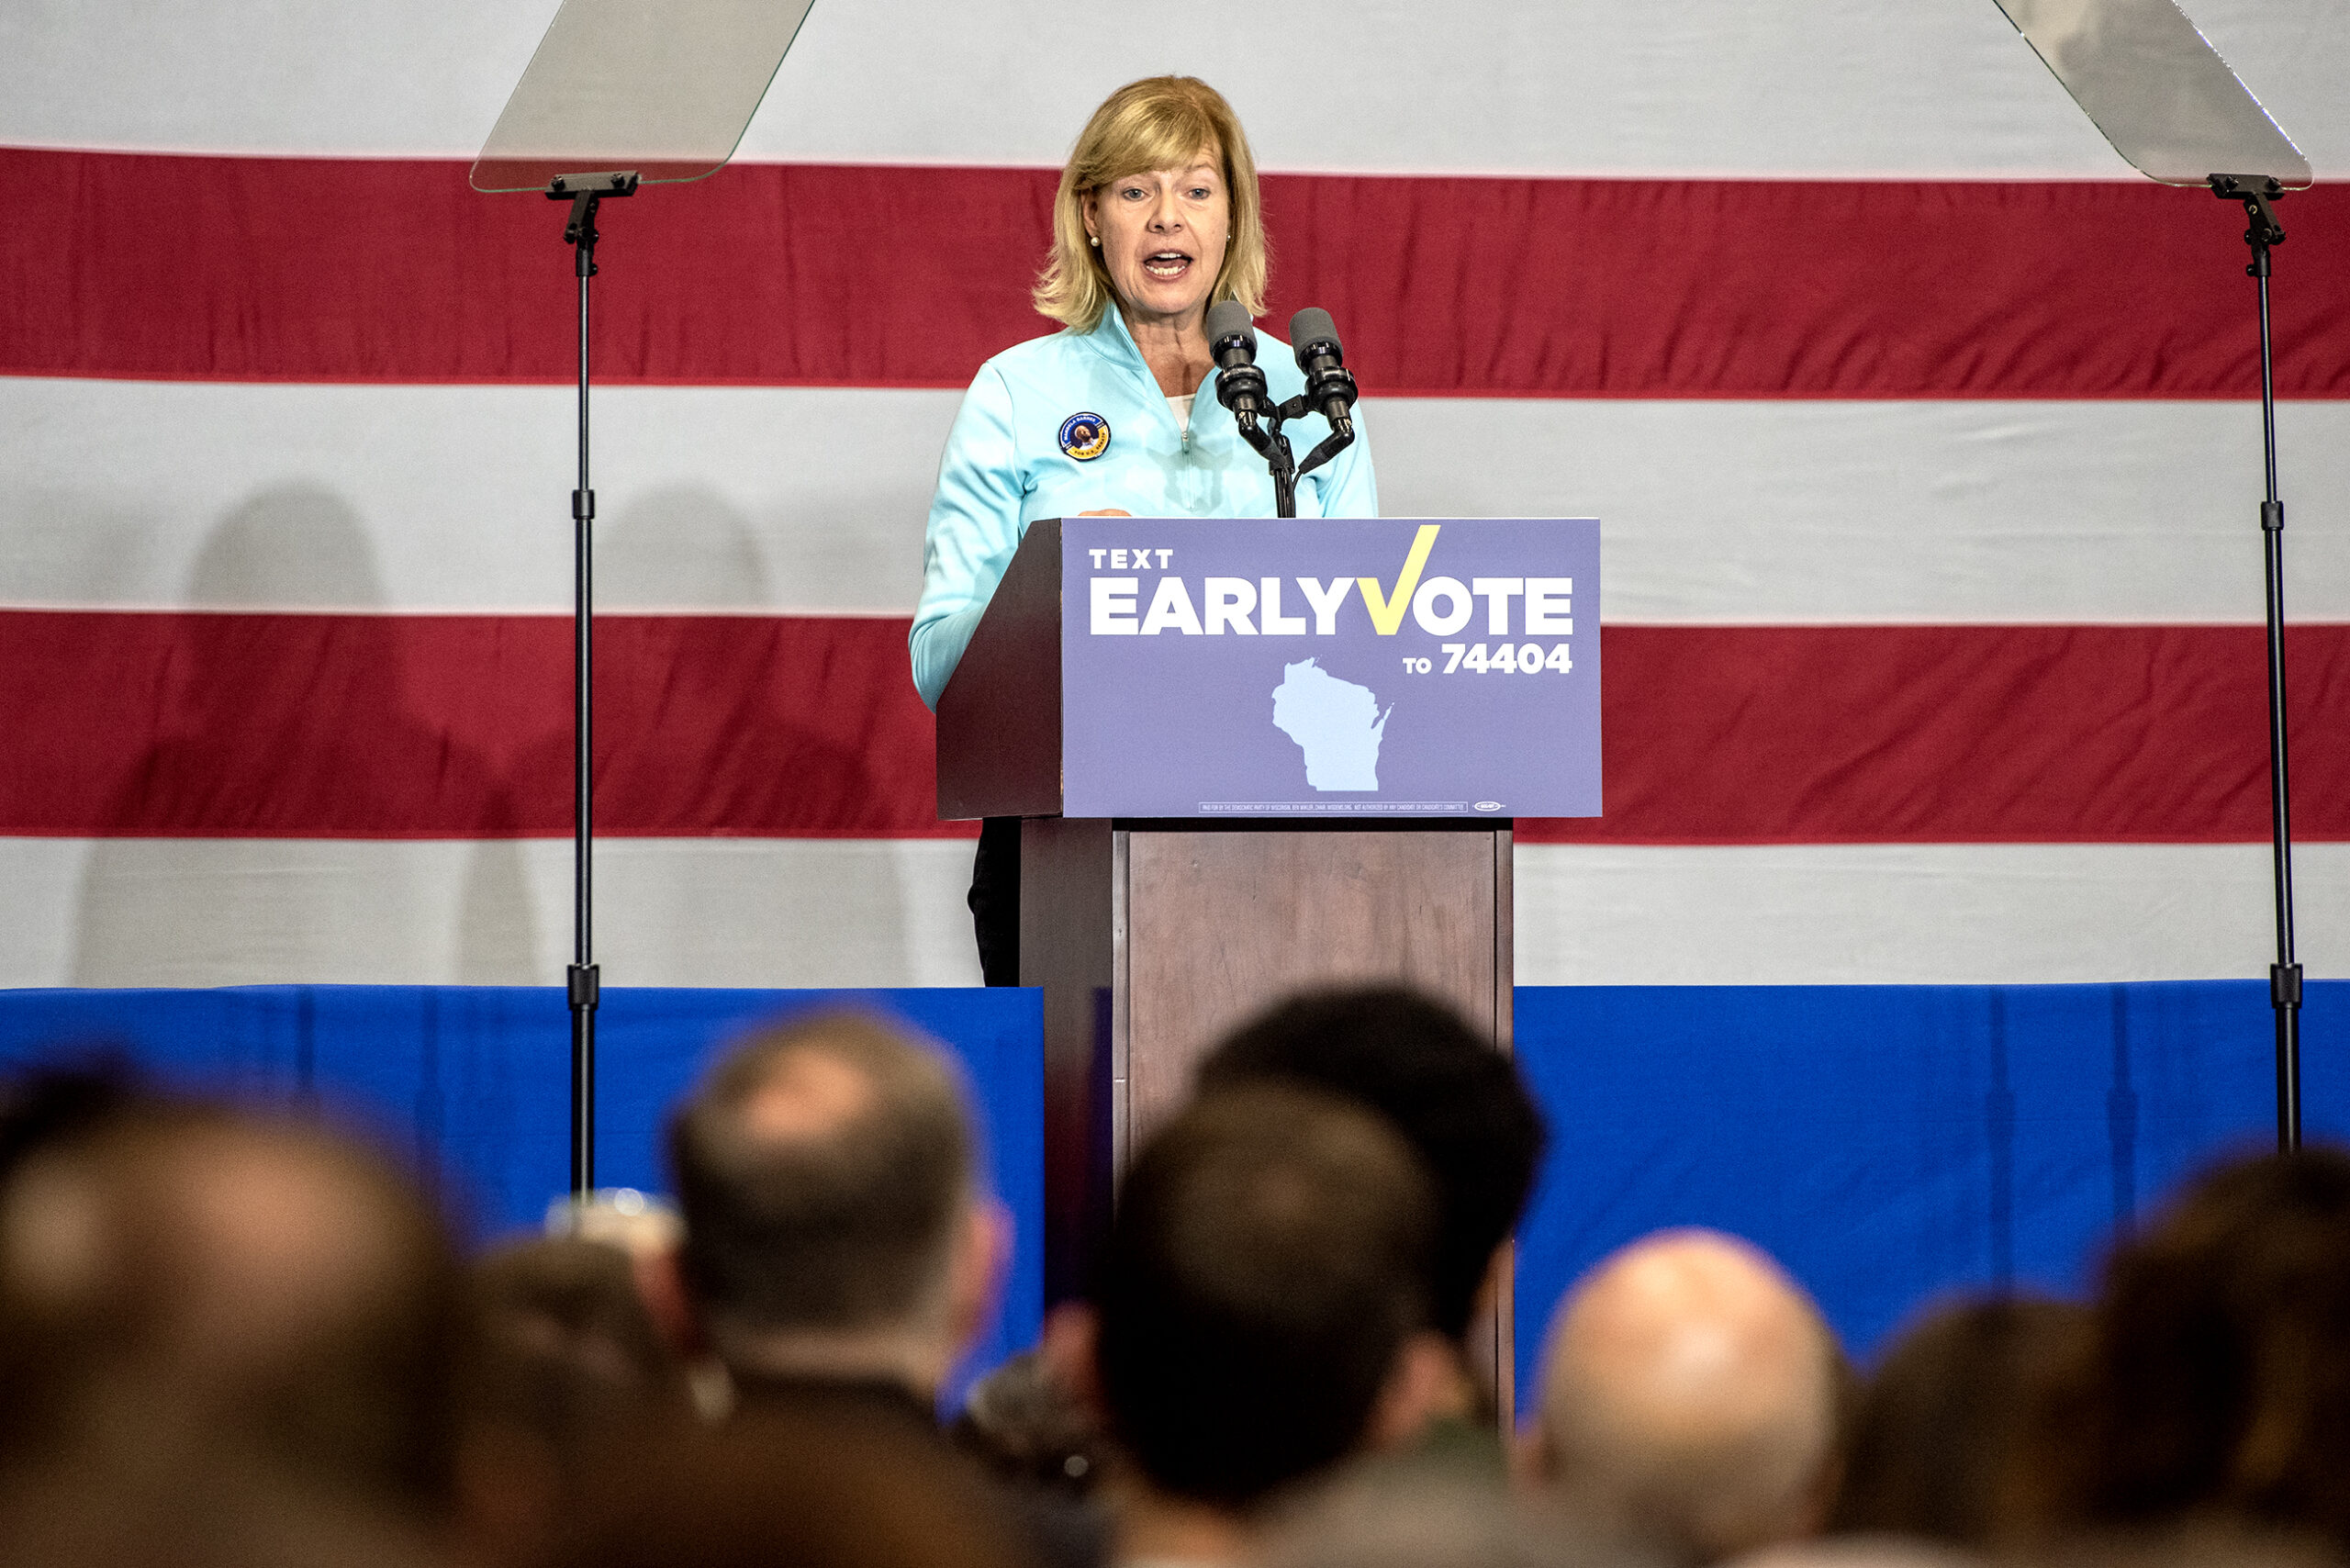 Sen. Tammy Baldwin speaks in front of a U.S. flag background. Attendees can be seen in the foreground.